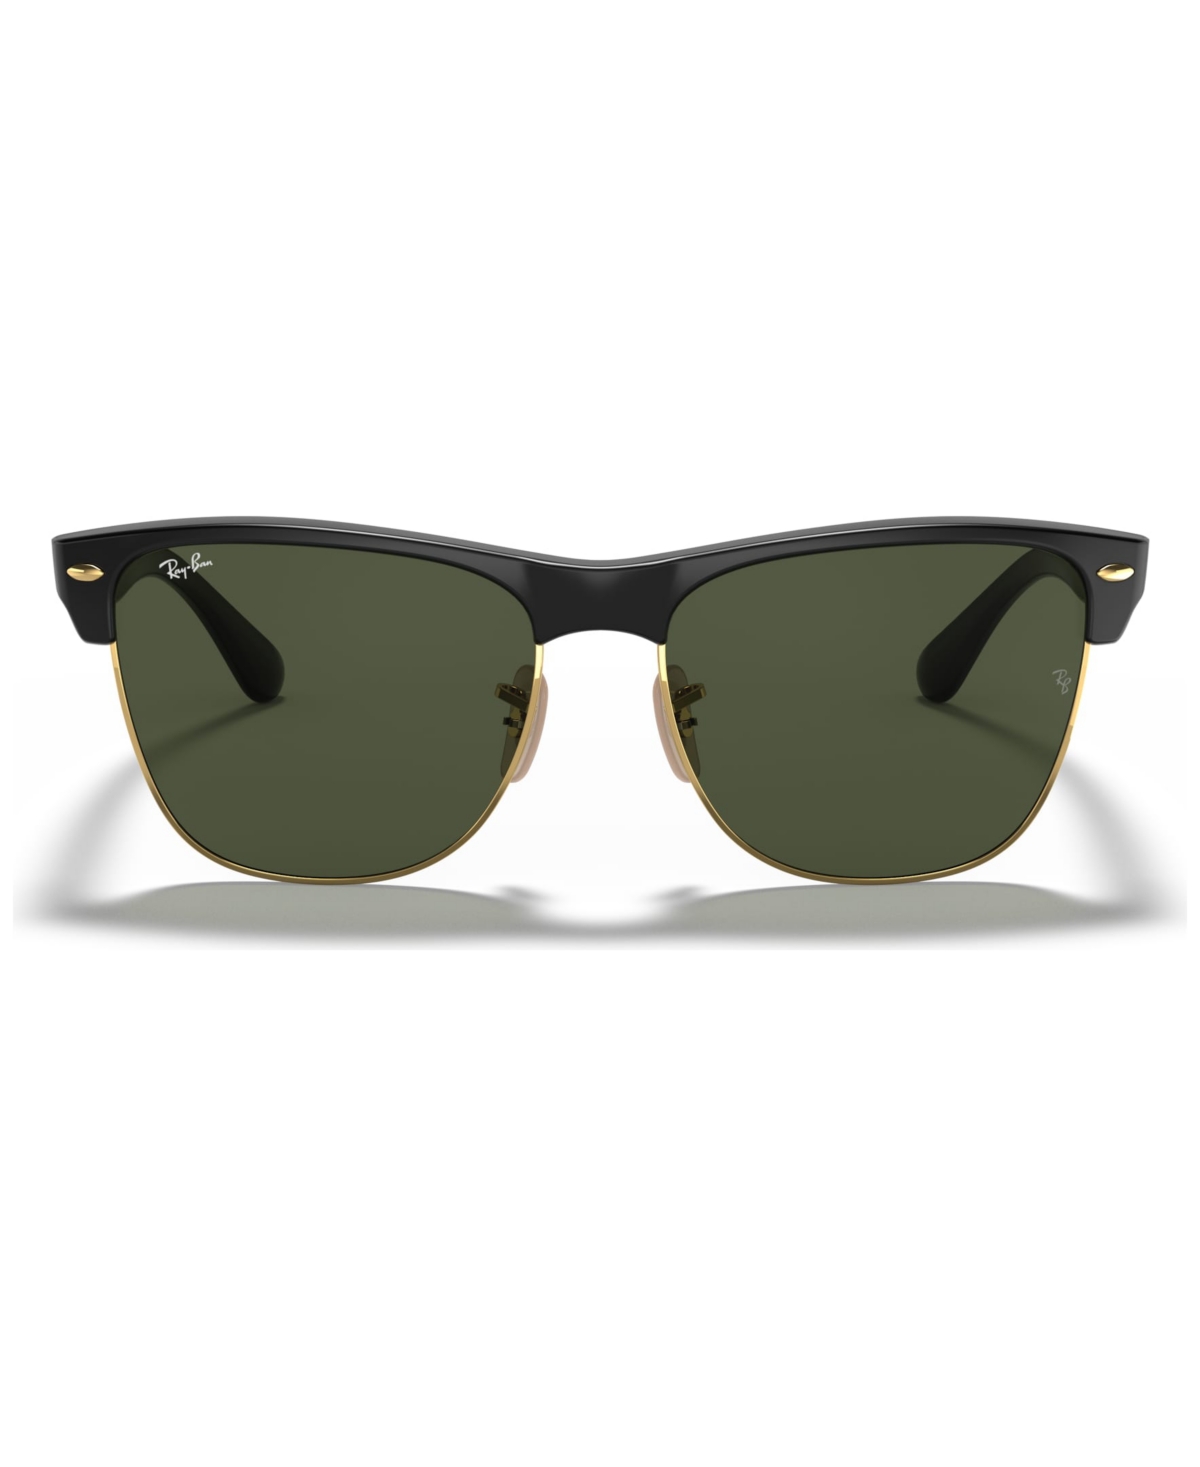 Ray-Ban Sunglasses, RB4175 CLUBMASTER OVERSIZED & Reviews - Sunglasses by  Sunglass Hut - Handbags & Accessories - Macy's